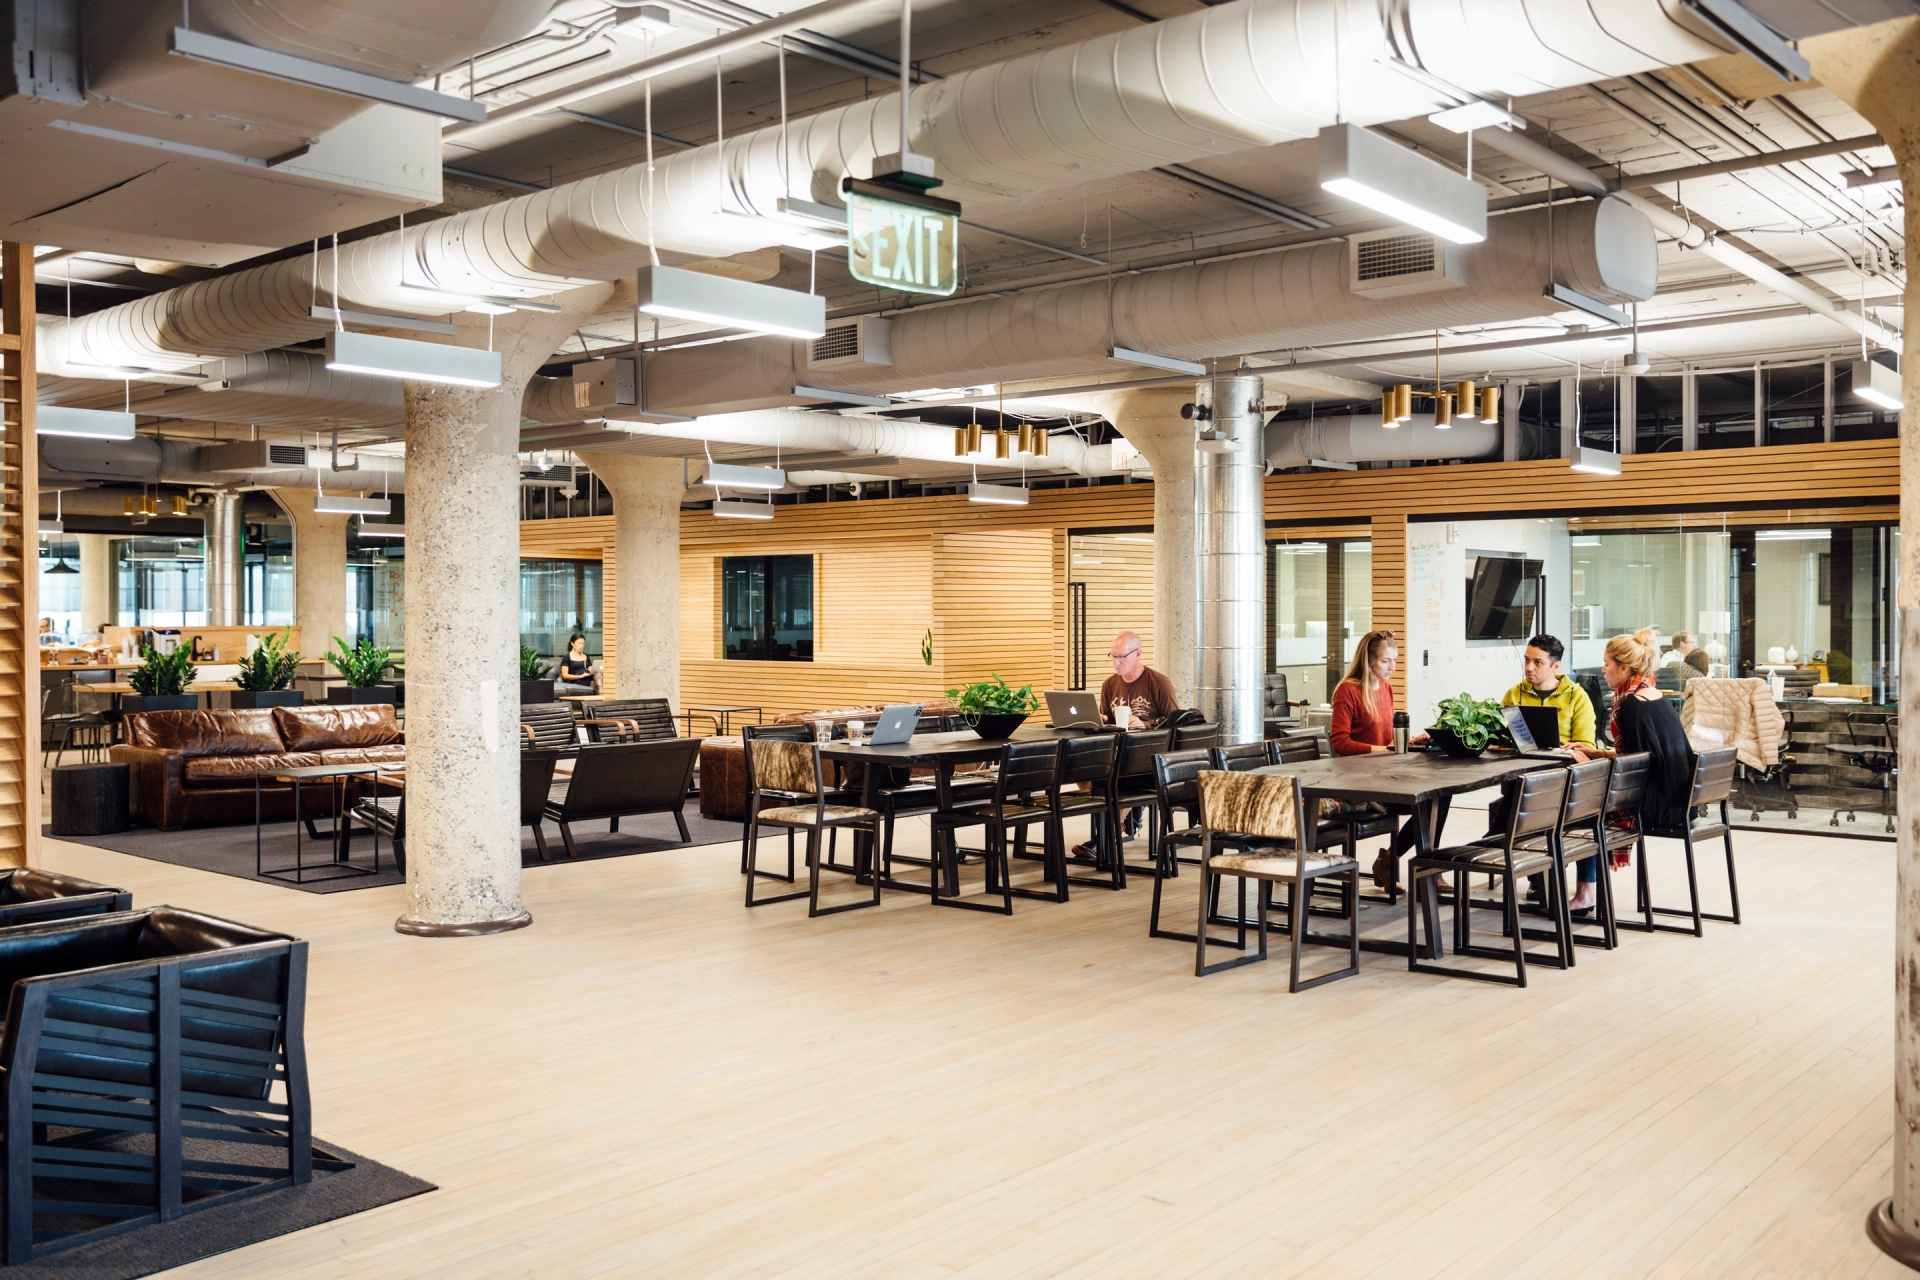 A coworking space in Atlanta outfitted with tables and chairs, resembling a large open office.